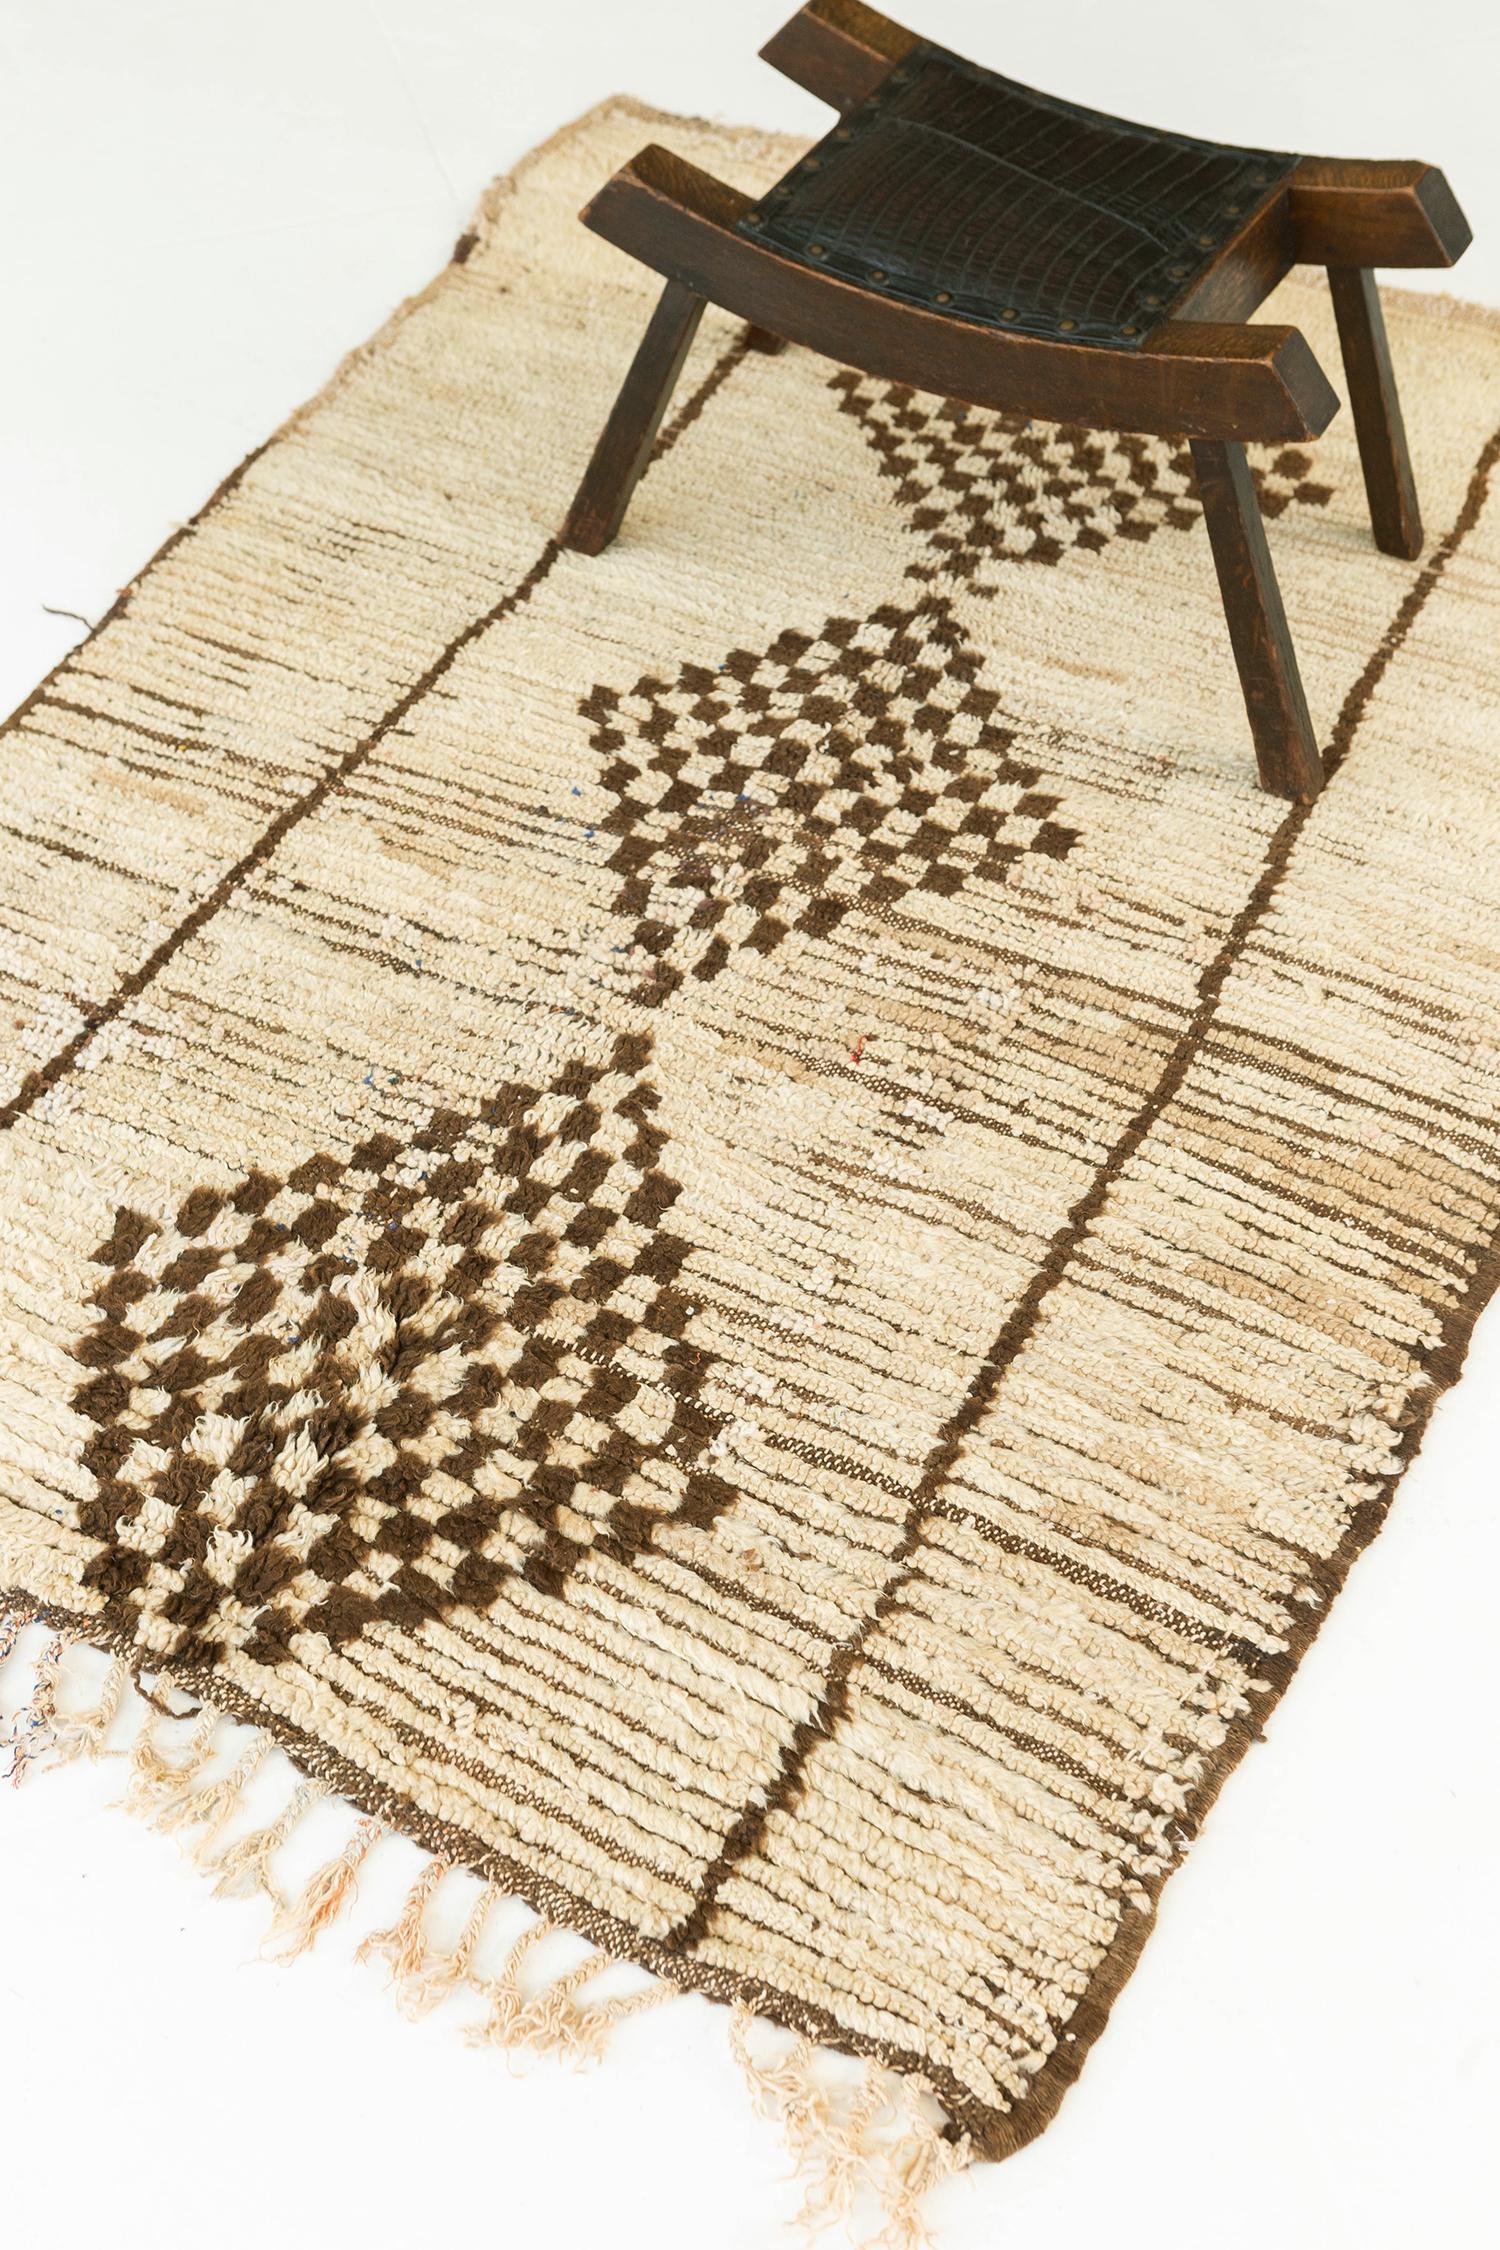 Ivory and pale tan pile field with dark brown checkerboard diamonds and vertical line elements. The foundation is multi-toned with broad bands of ivory and brown highlighting horizontal lineation between rows of knots in portions of the rug. A